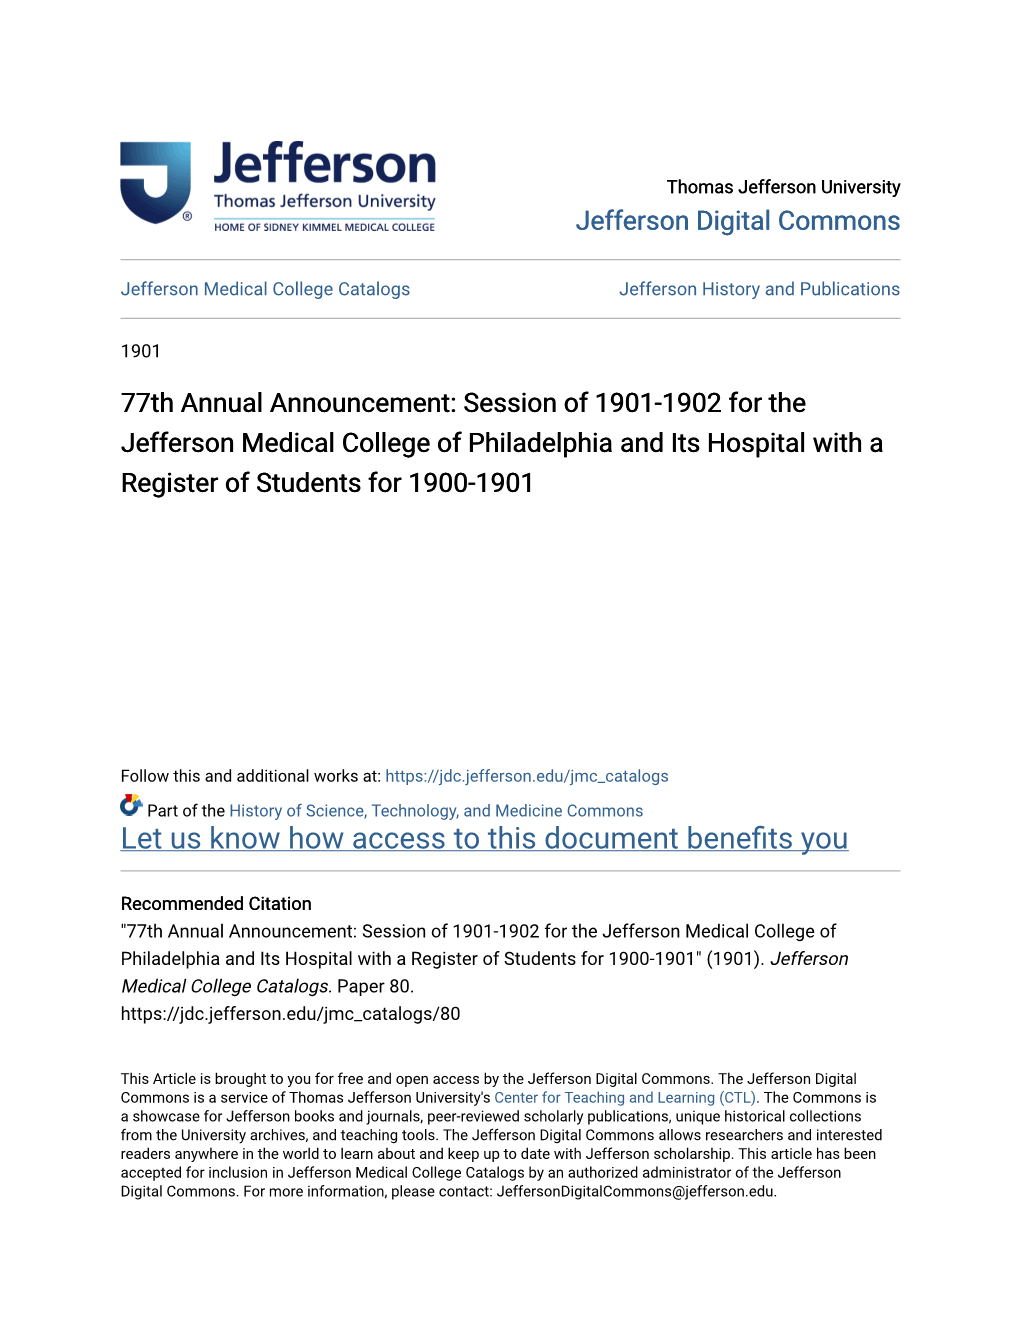 77Th Annual Announcement: Session of 1901-1902 for the Jefferson Medical College of Philadelphia and Its Hospital with a Register of Students for 1900-1901